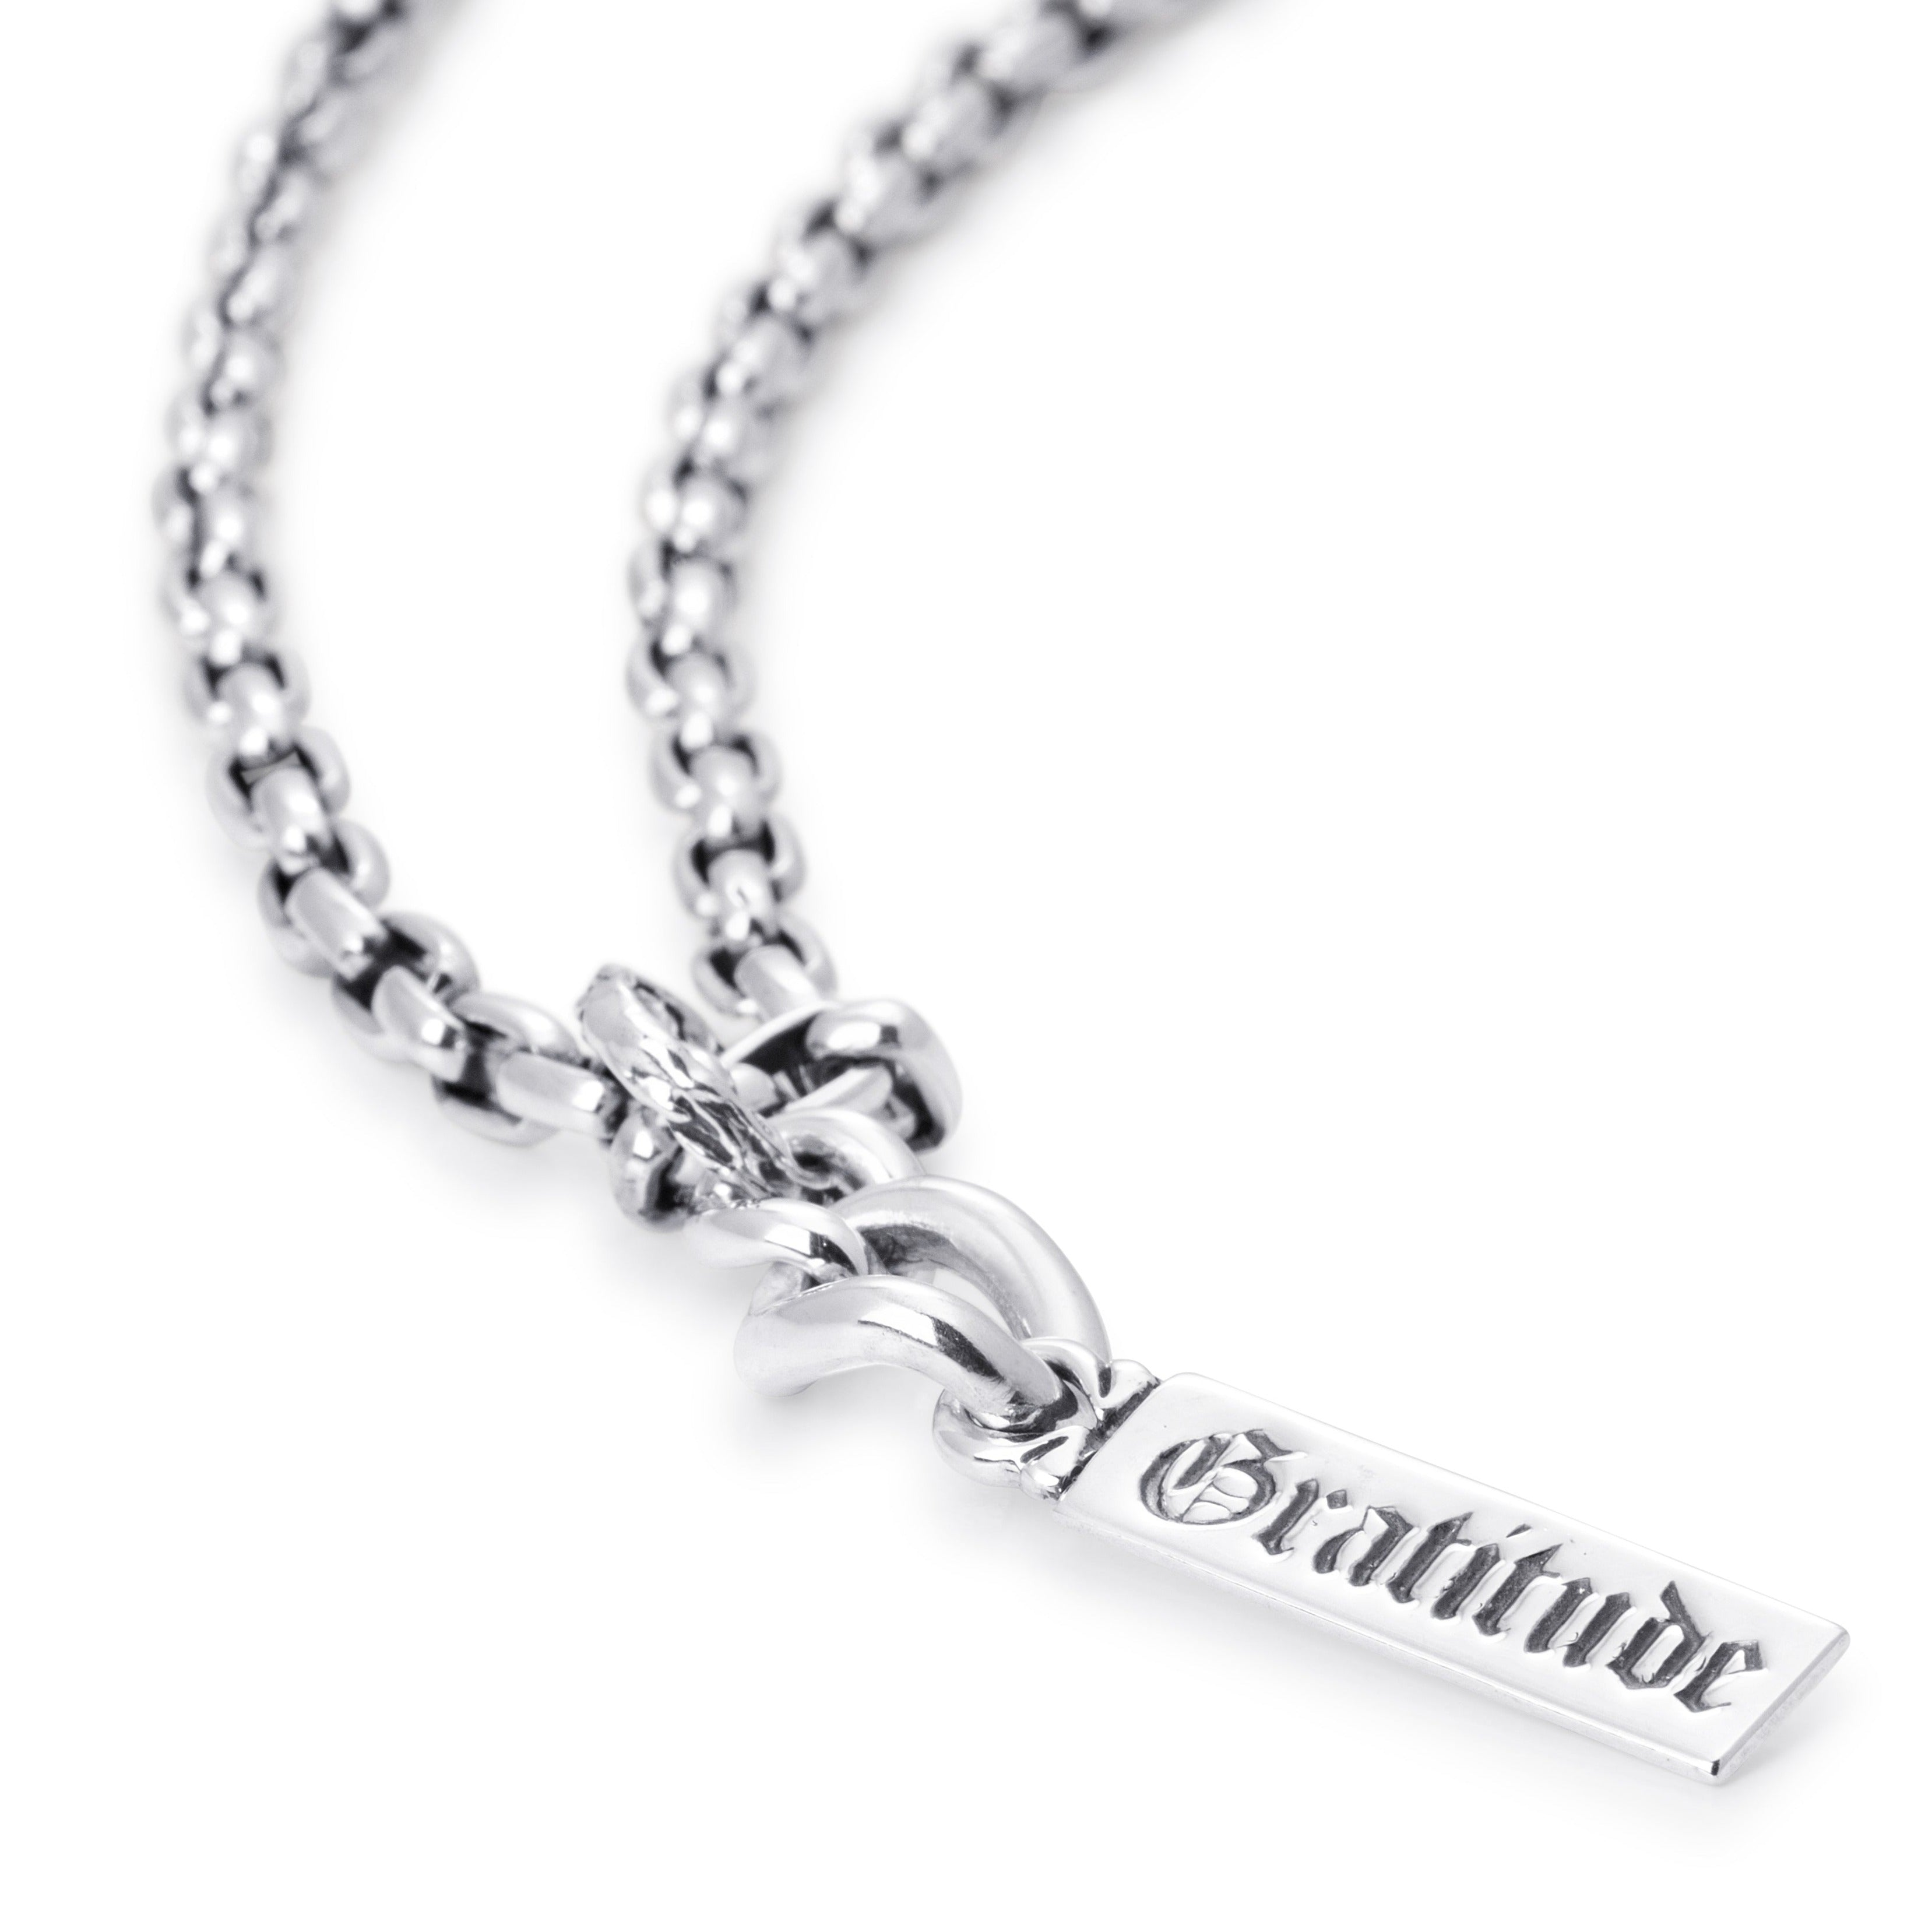 Gratitude Word Pendant in Sterling Silver engraved in an Old World font.